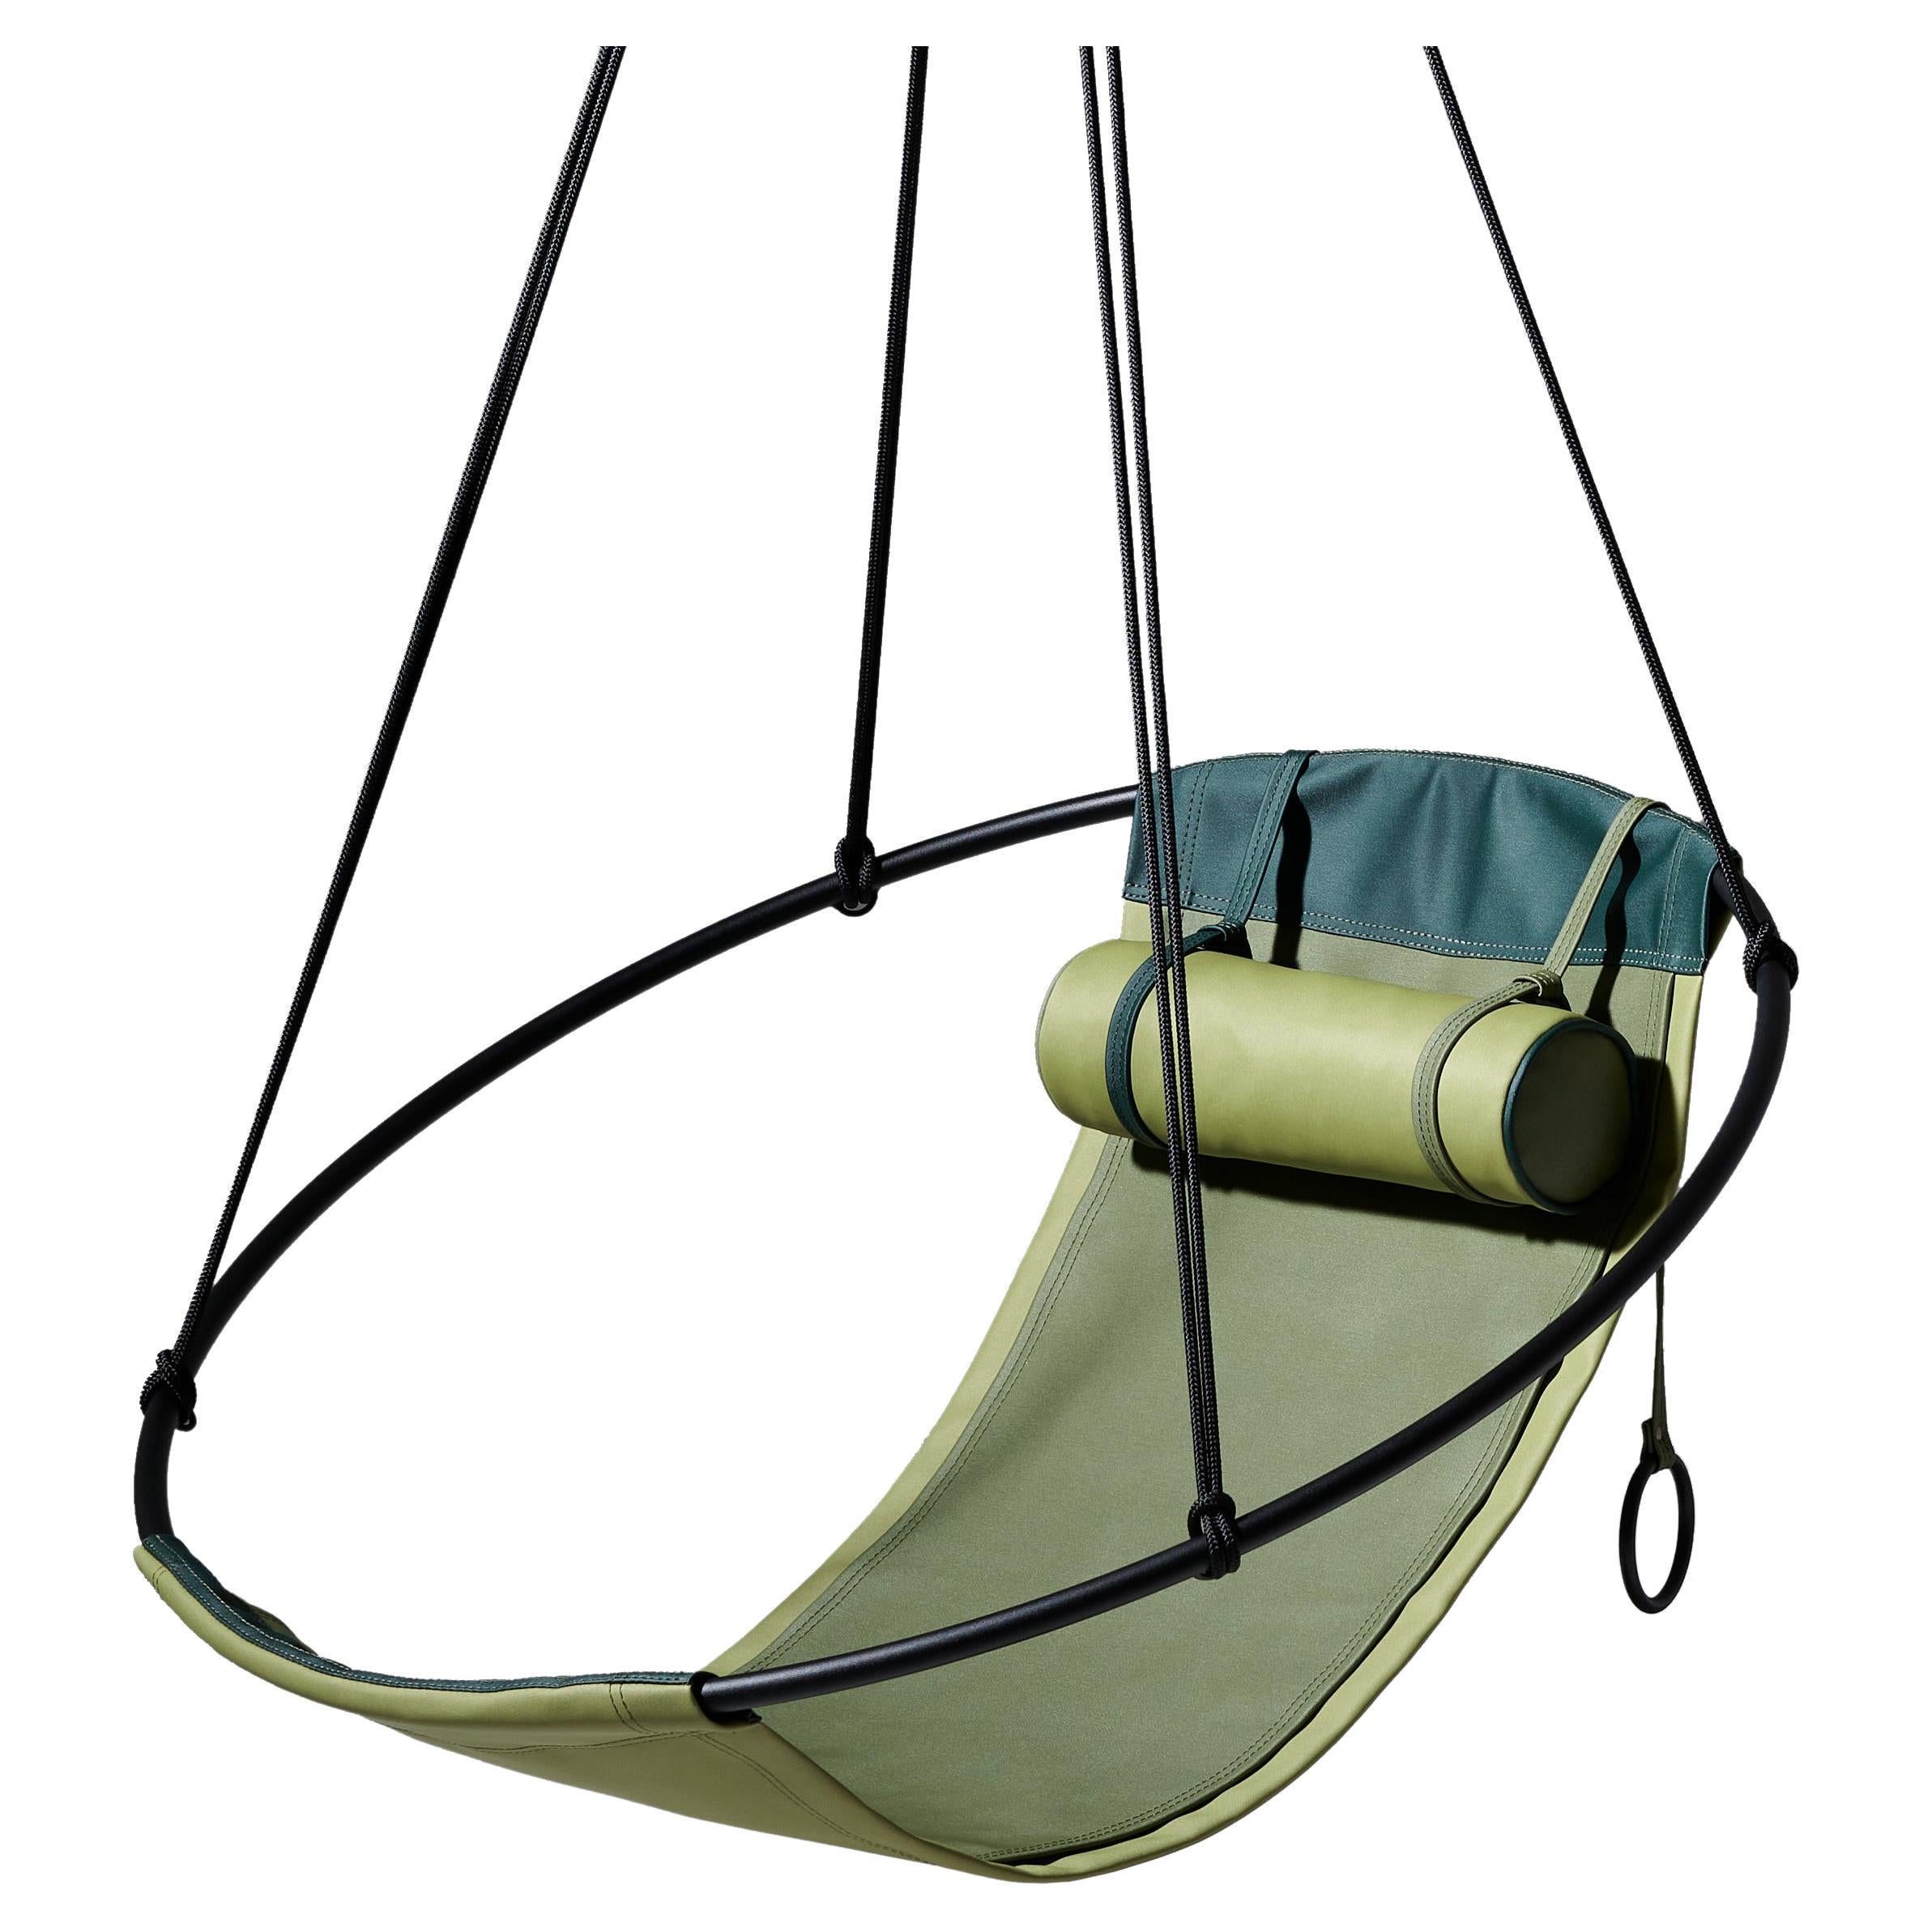 Modern, Outdoor Swing Chair - Perfect for the pool For Sale